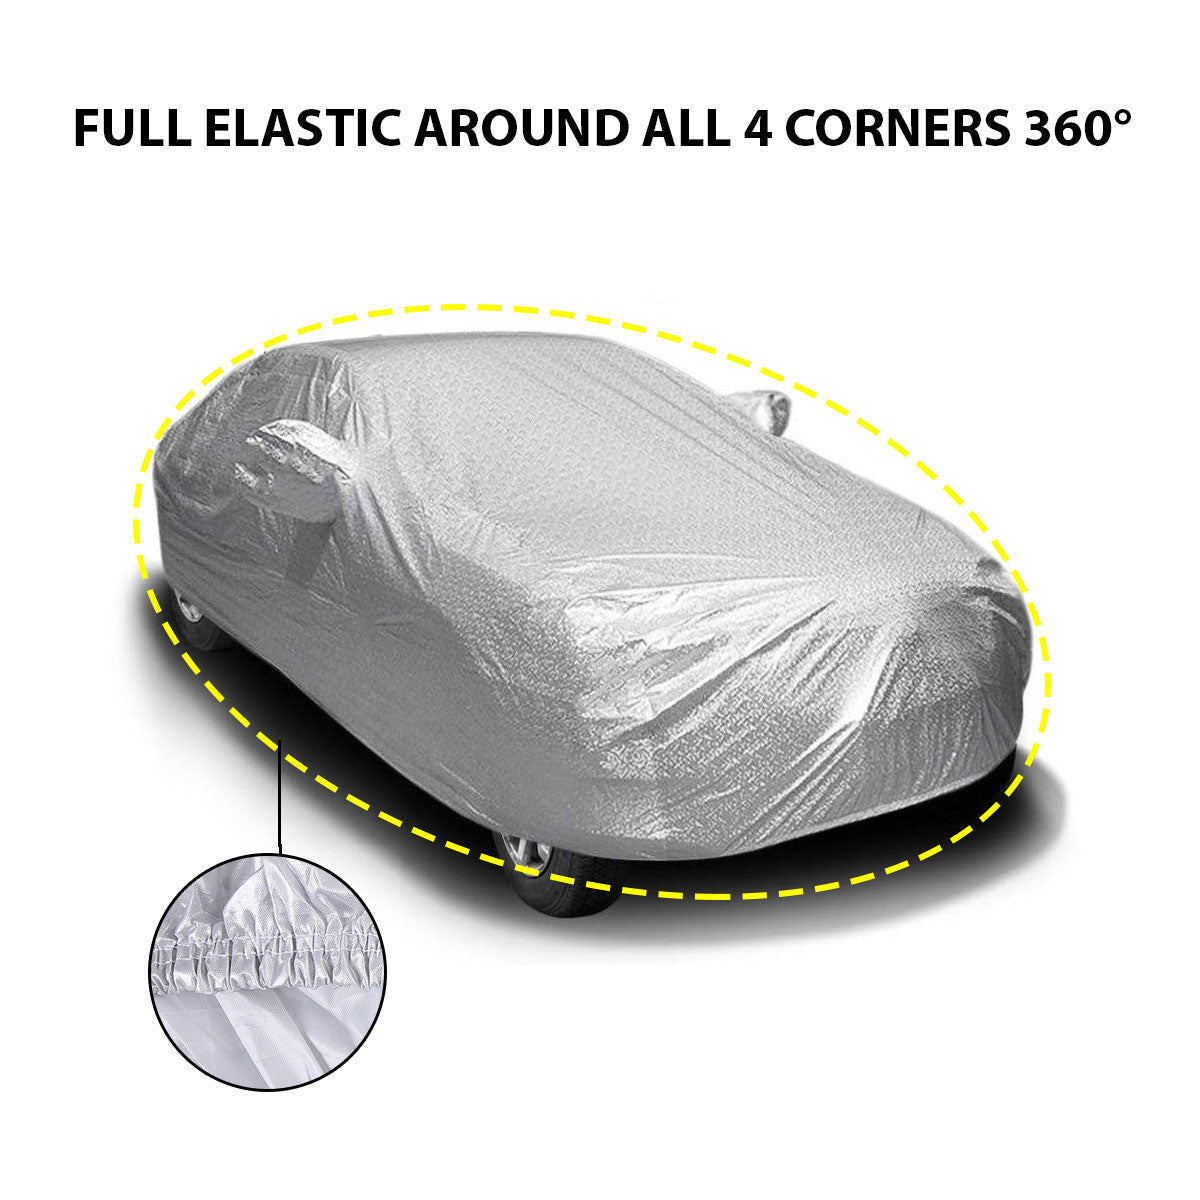 Oshotto Spyro Silver Anti Reflective, dustproof and Water Proof Car Body Cover with Mirror Pockets For Hyundai i20 (2020-2023)